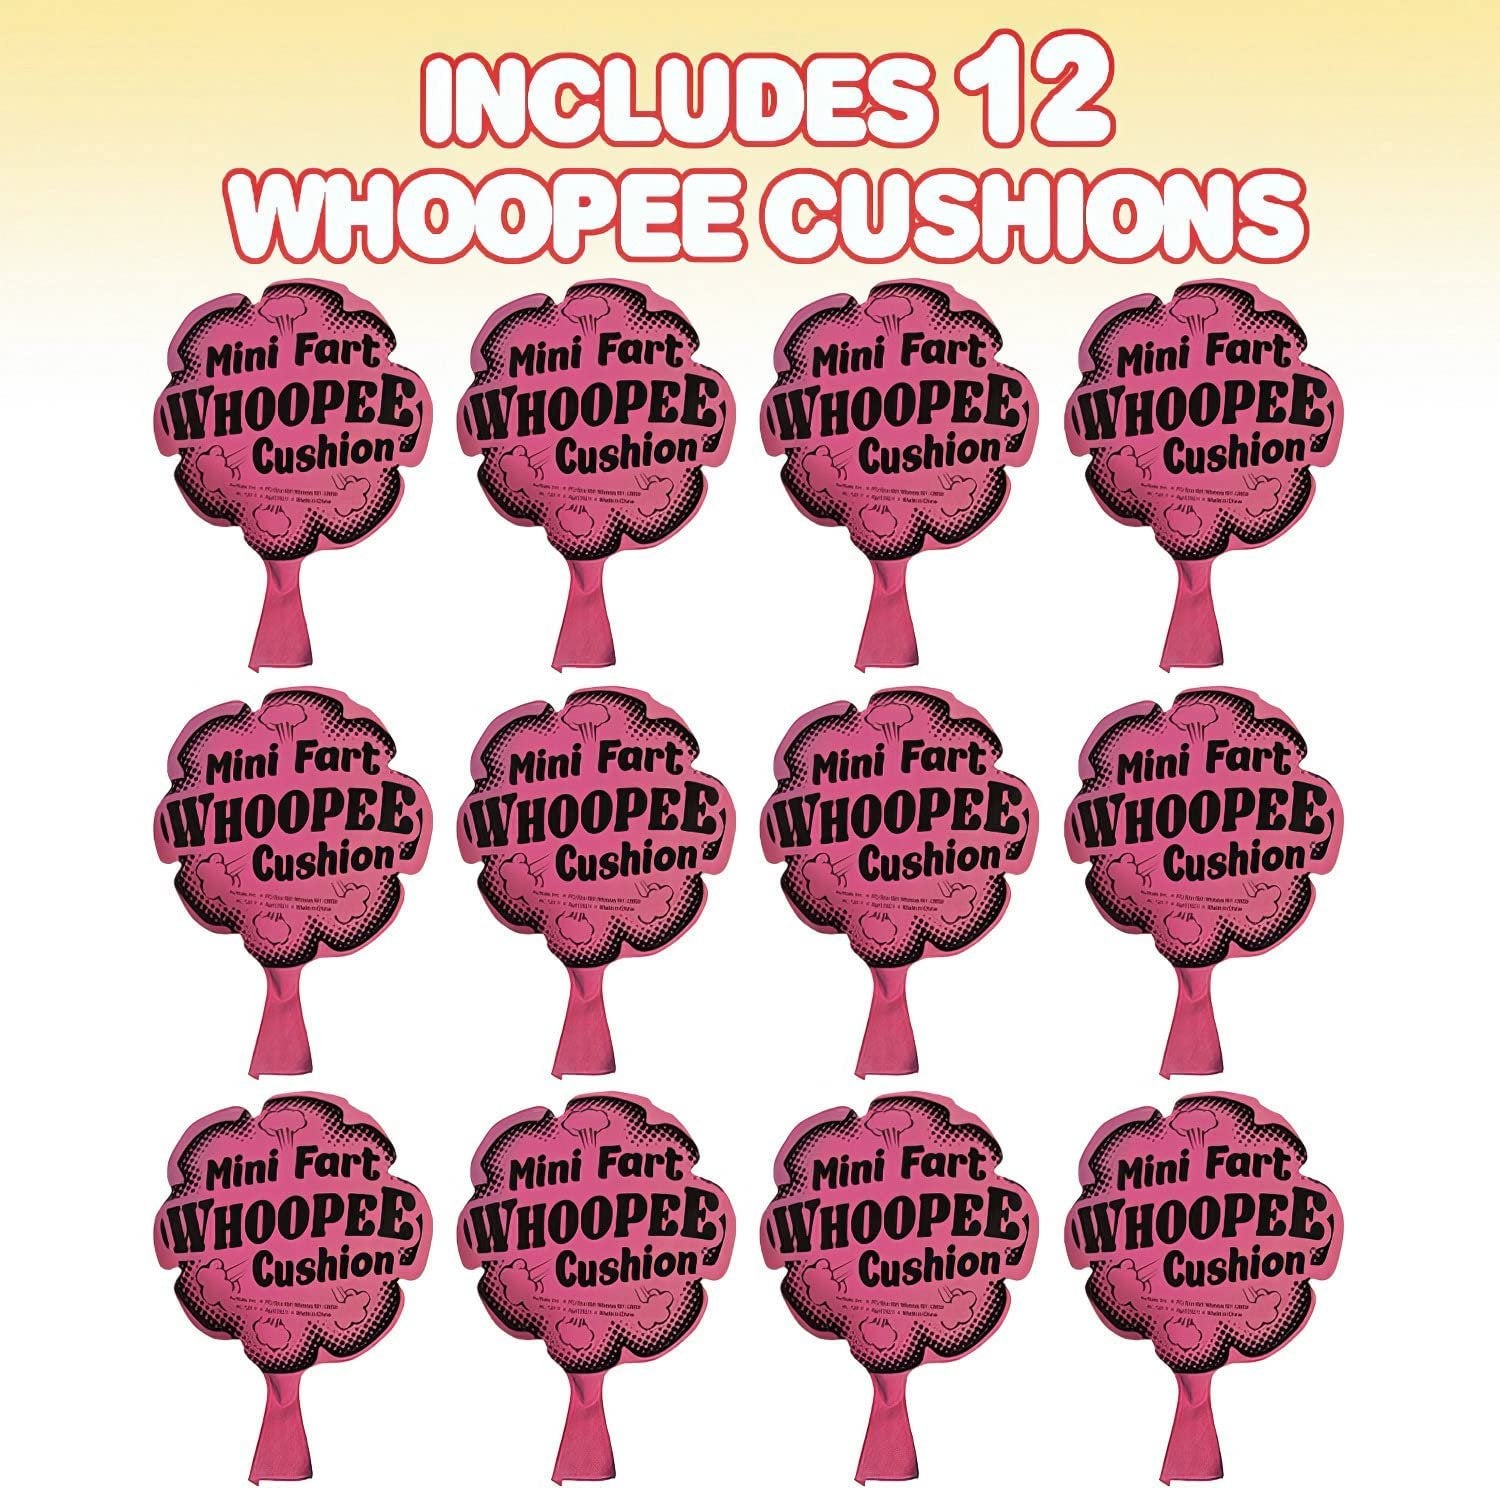 6" Mini Fart Whoopee Cushions - Set of 12 - Fun Whoopee Noise Makers for Kids and Adults - 100% Non-Toxic Prank Toy - Novelty Gag Joke Gift - Birthday Party Favors for Boys and Girls